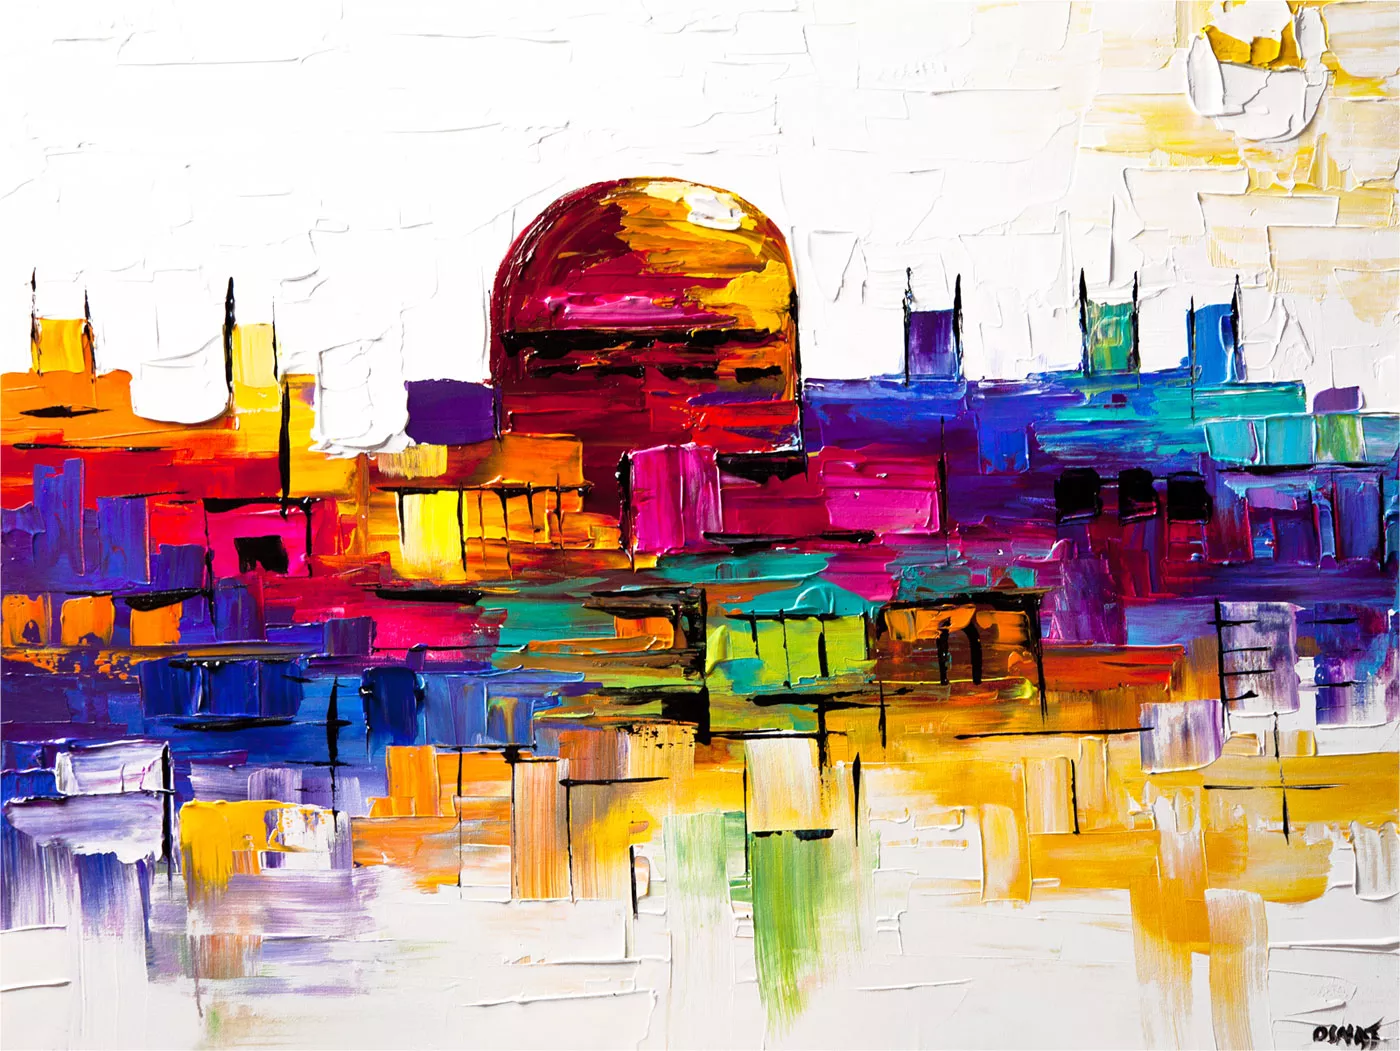 print on paper - canvas print colorful painting of Jerusalem golden dome